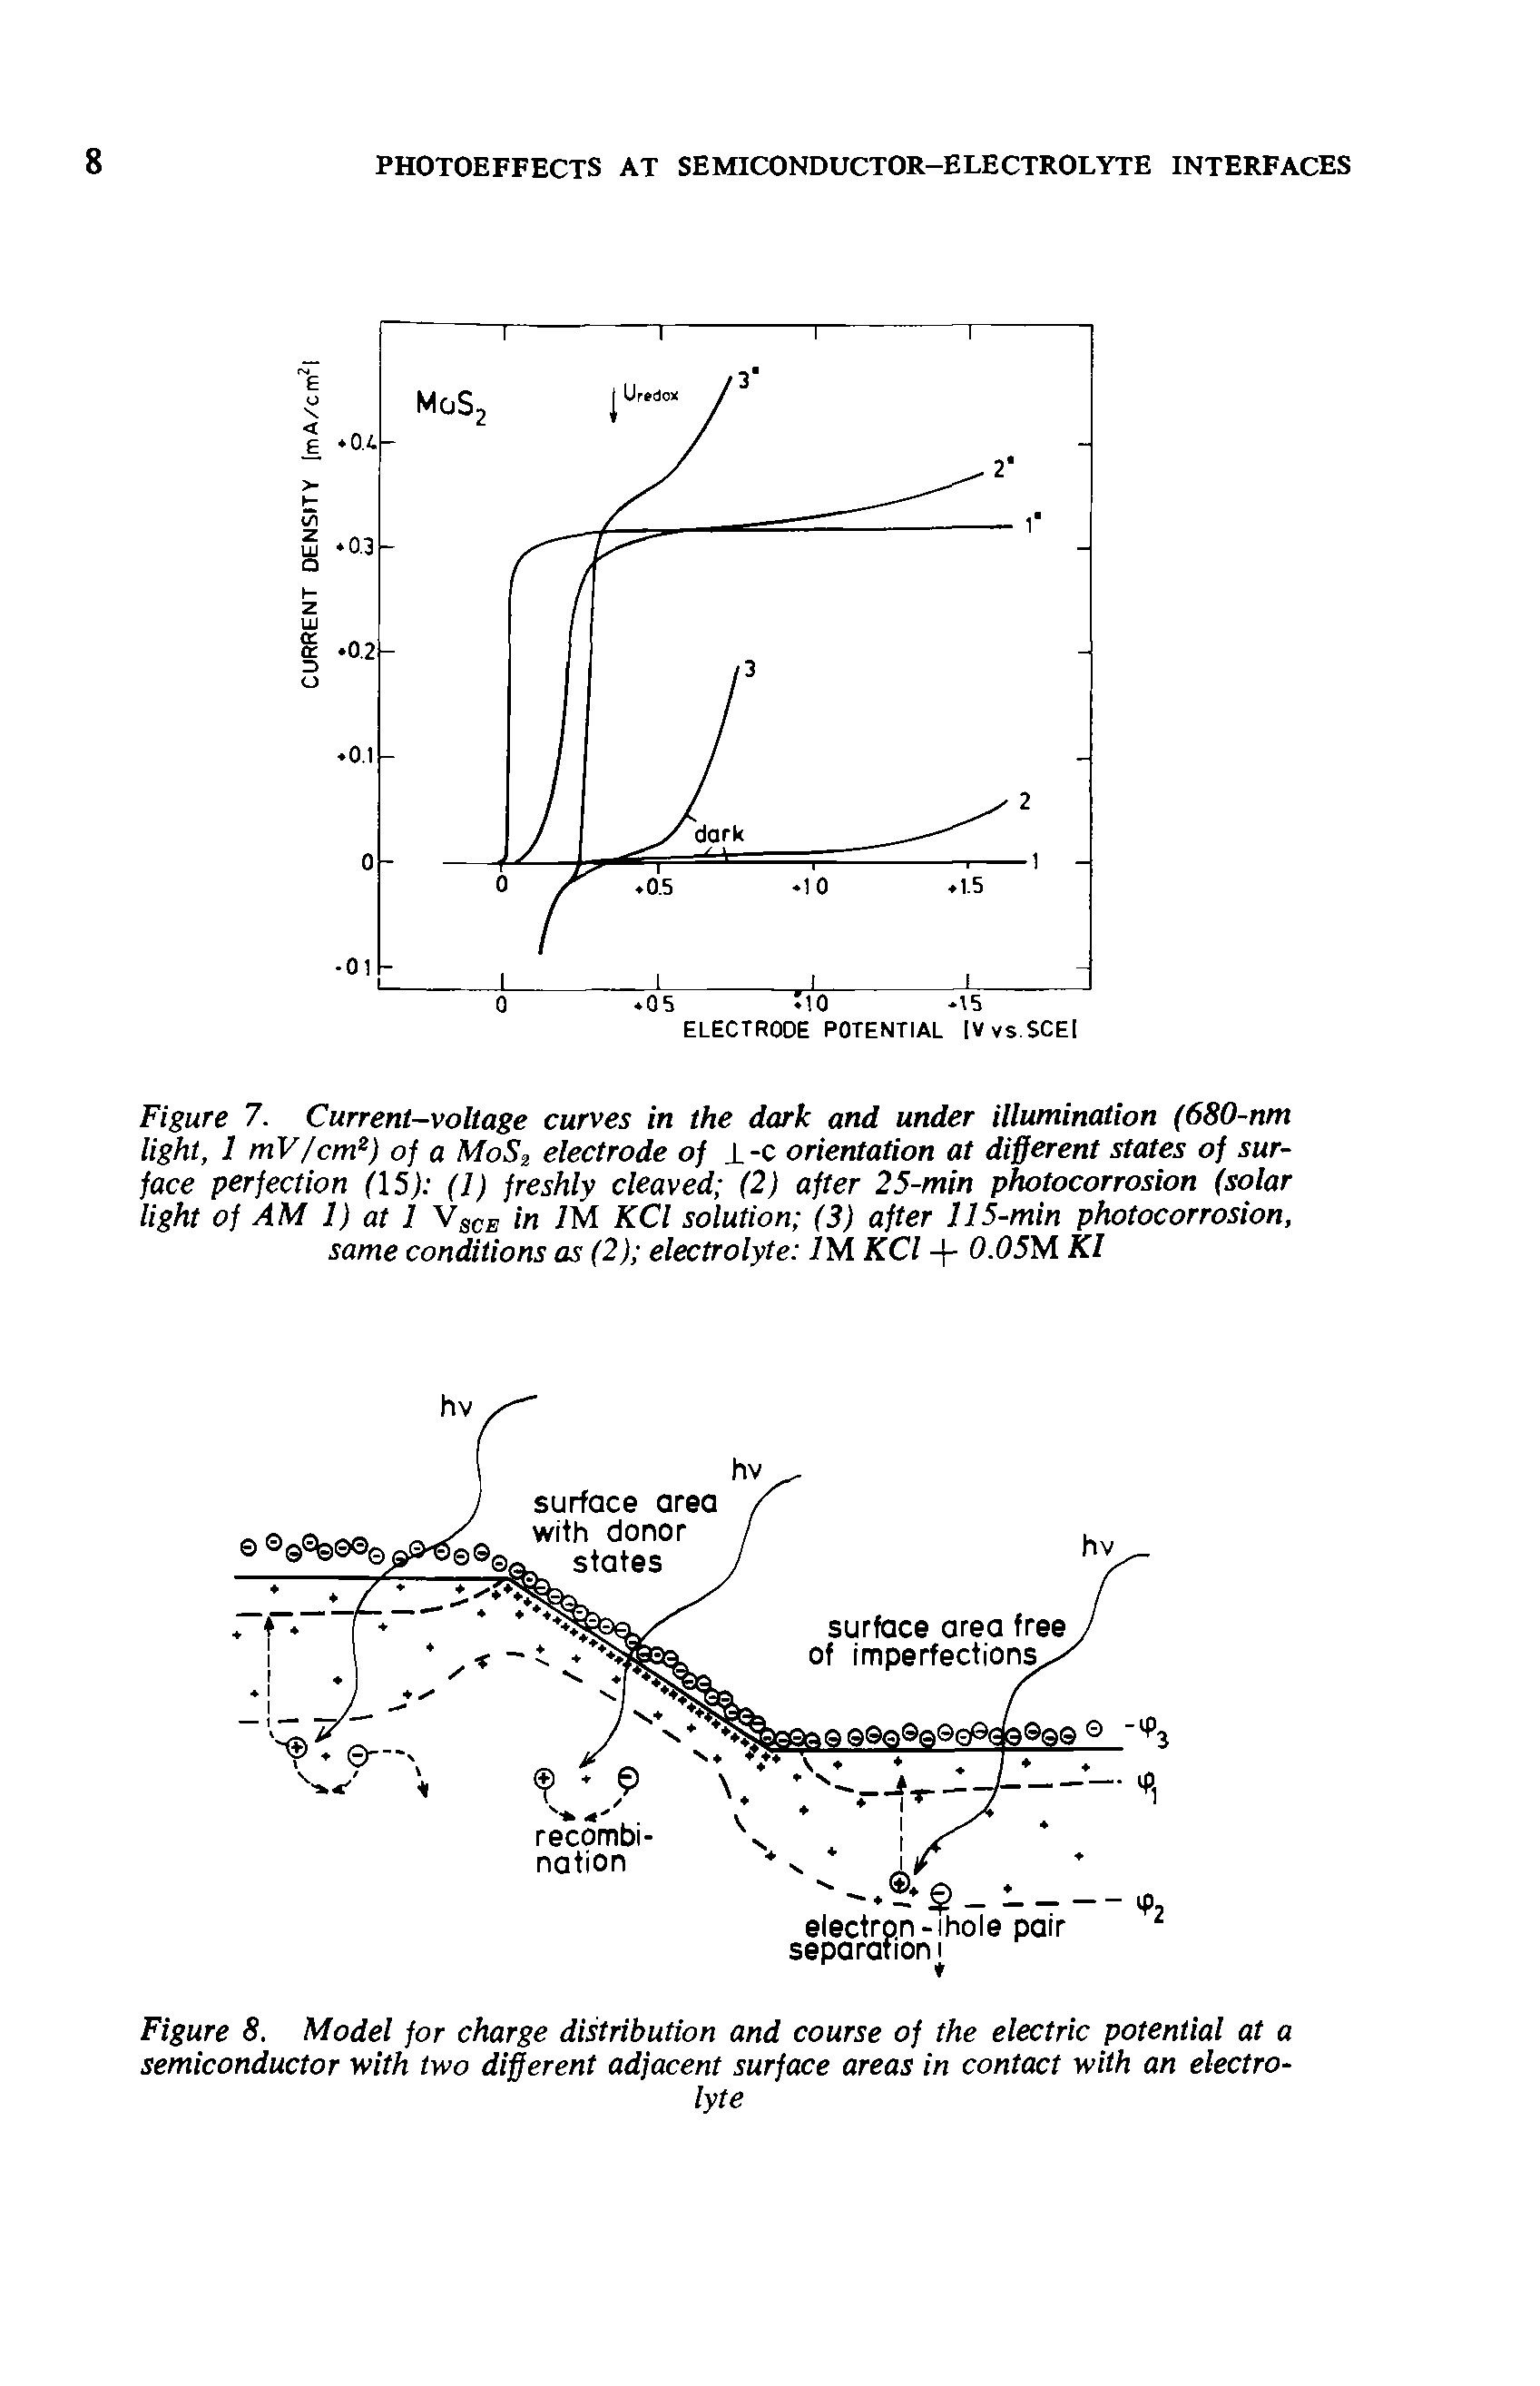 Figure 8. Model for charge distribution and course of the electric potential at a semiconductor with two different adjacent surface areas in contact with an electrolyte...